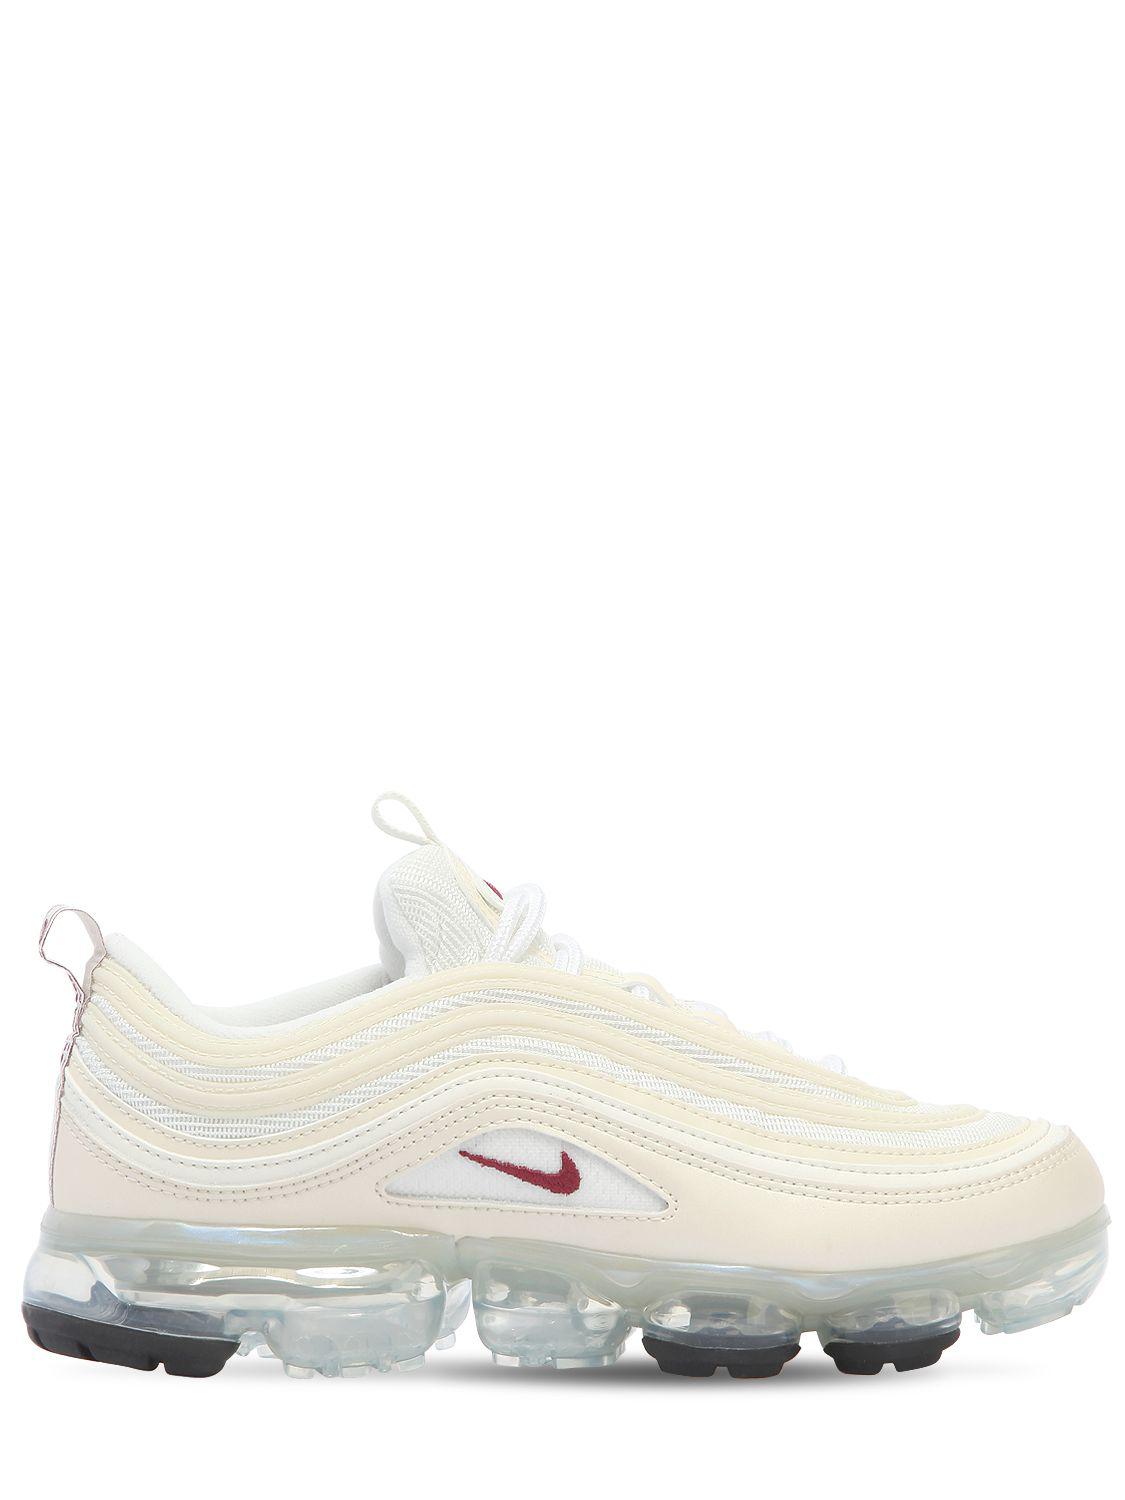 Nike Leather Air Vapormax 97 Sneakers for Men - Lyst